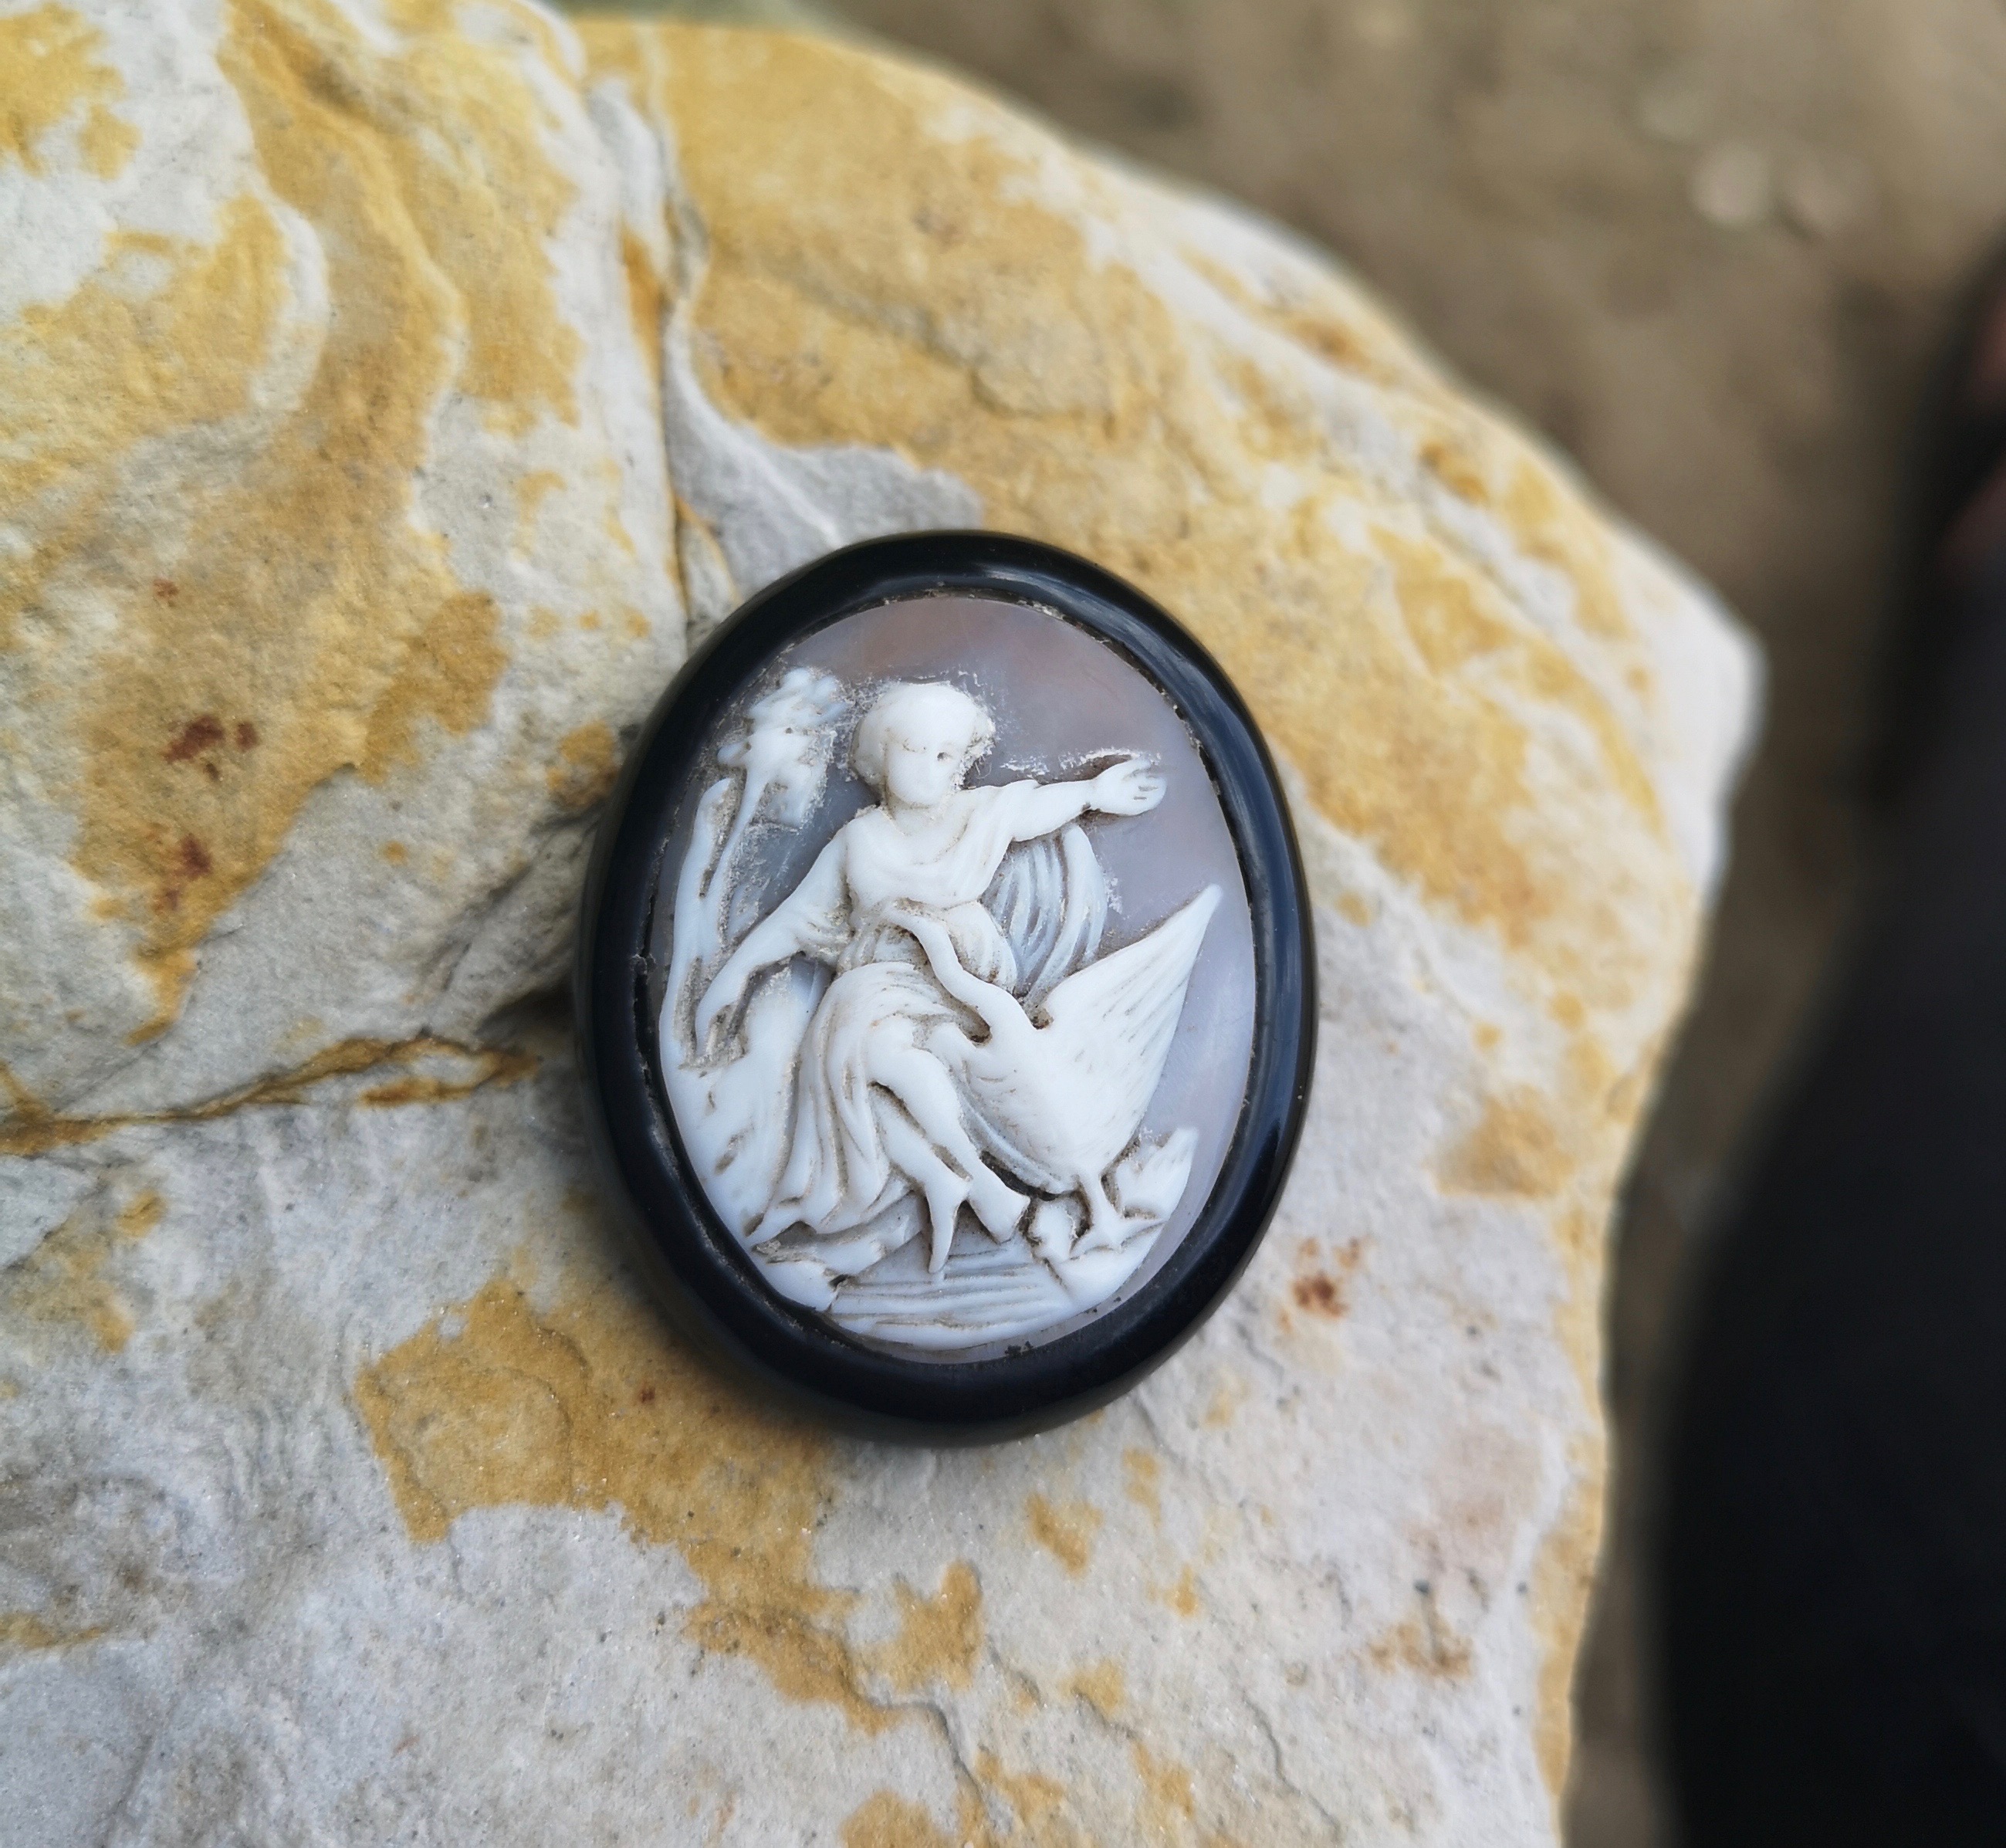 Antique Whitby Jet brooch “Leda and the swan”